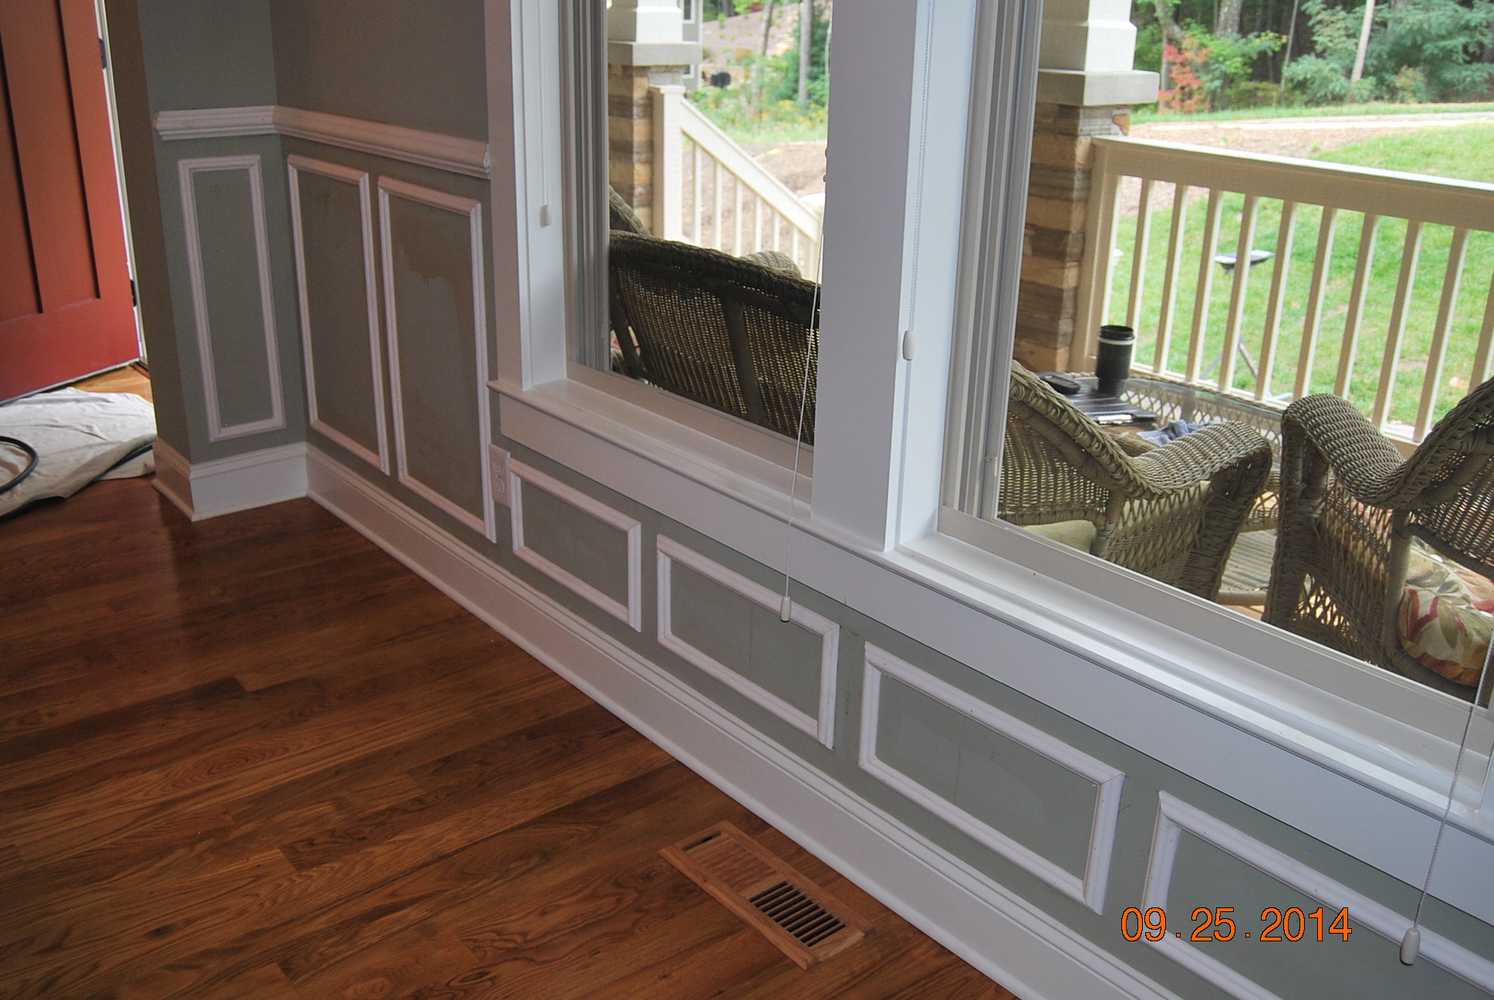 BOND CHAIR RAIL & PANEL MOULDINGS: from Gary J. Palmirotto, Inc.